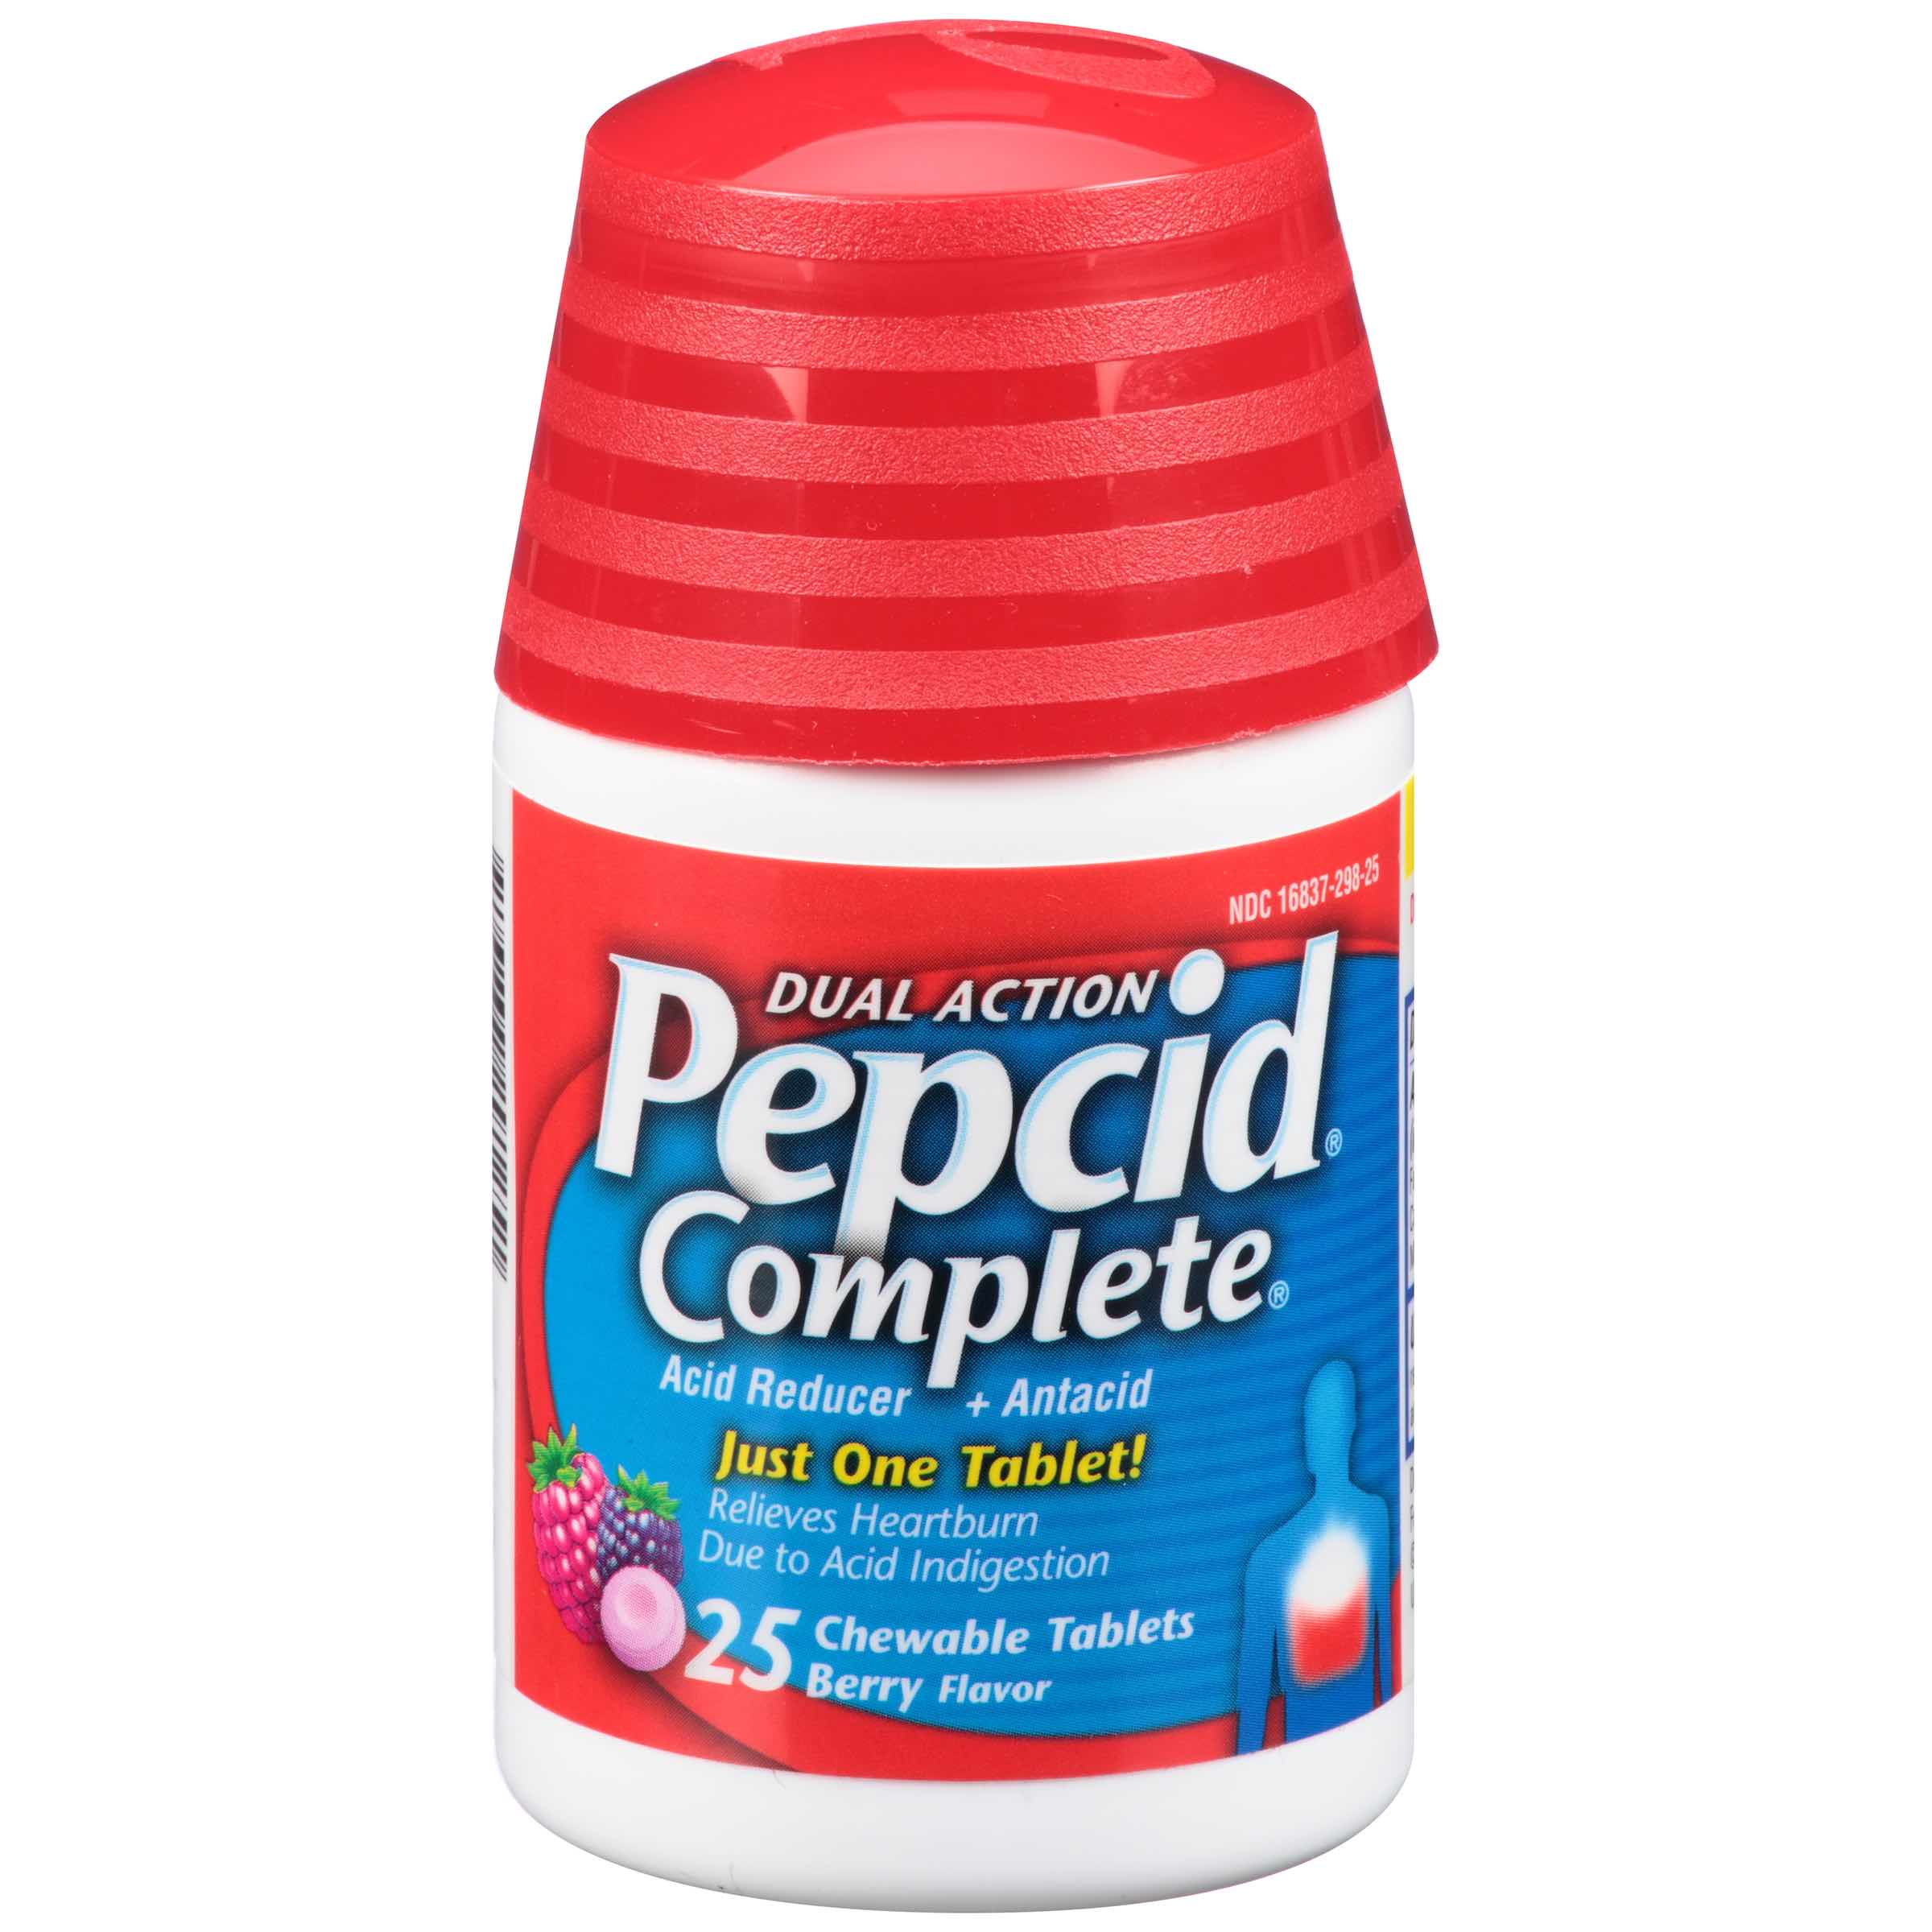 whats in pepcid complete